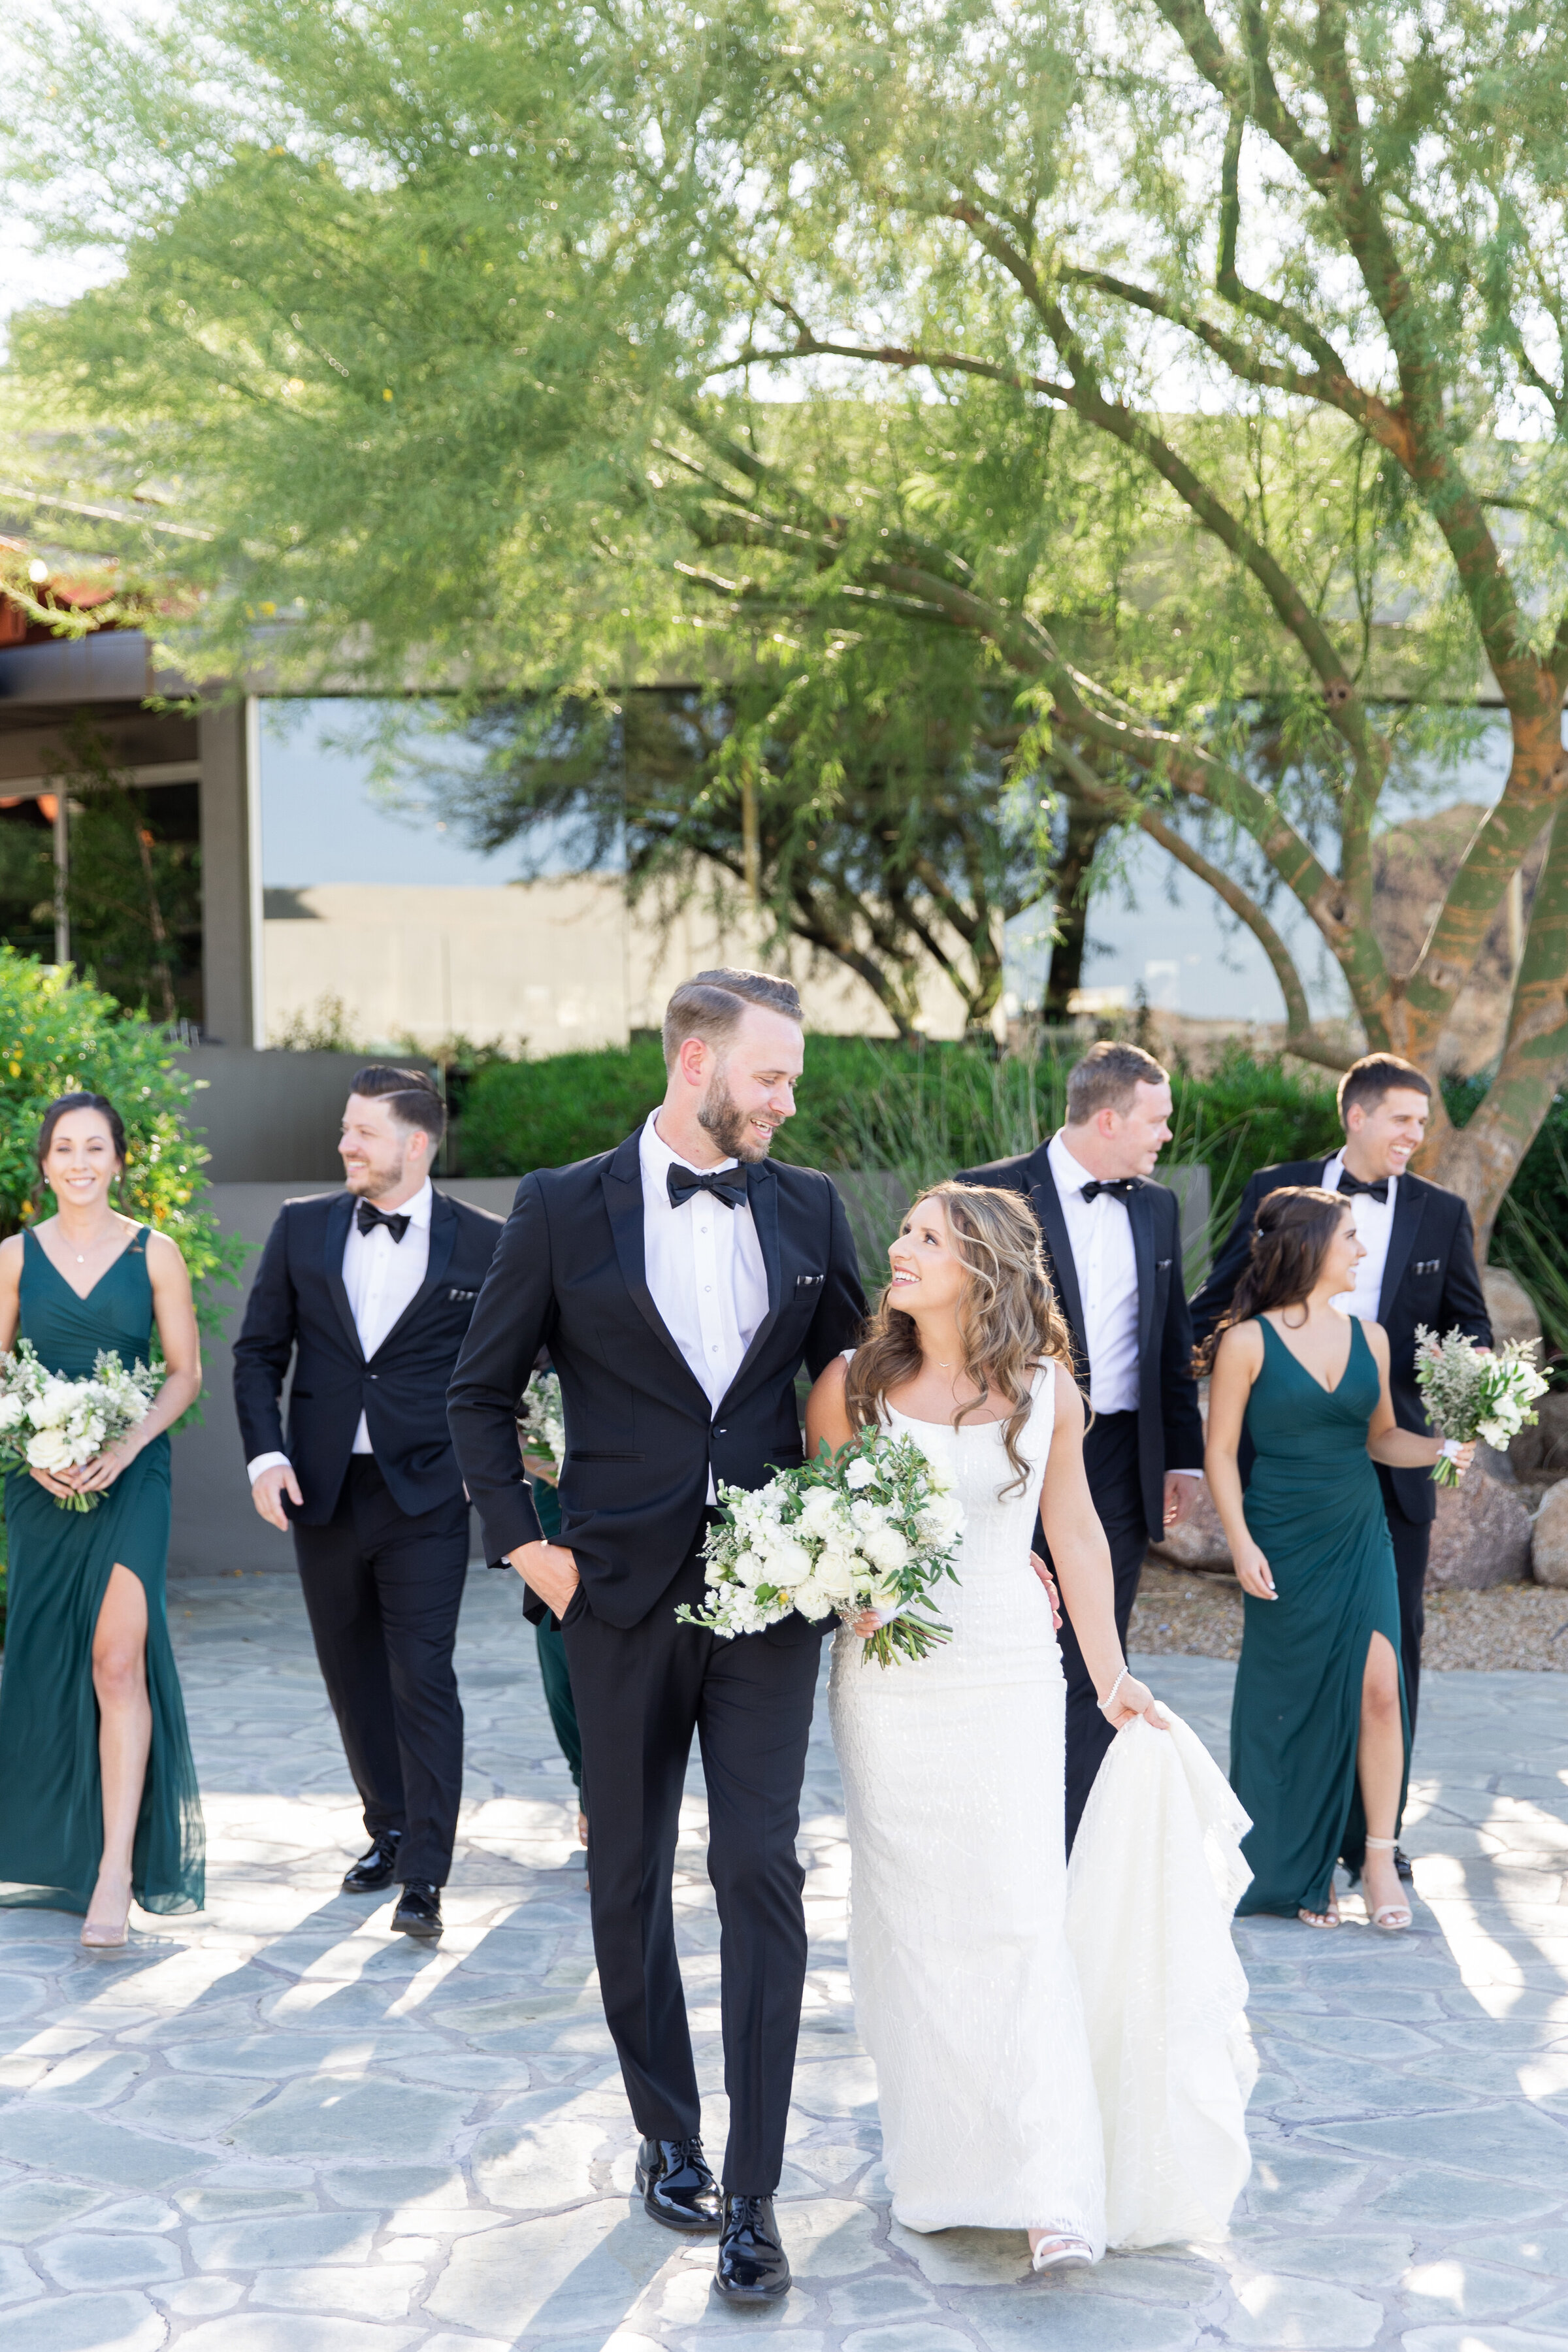 Karlie Colleen Photography - Josh & Jessica - Sanctuary Camelback Mountain Resort - Paradise Valley Arizona - Outstanding Occasions-123